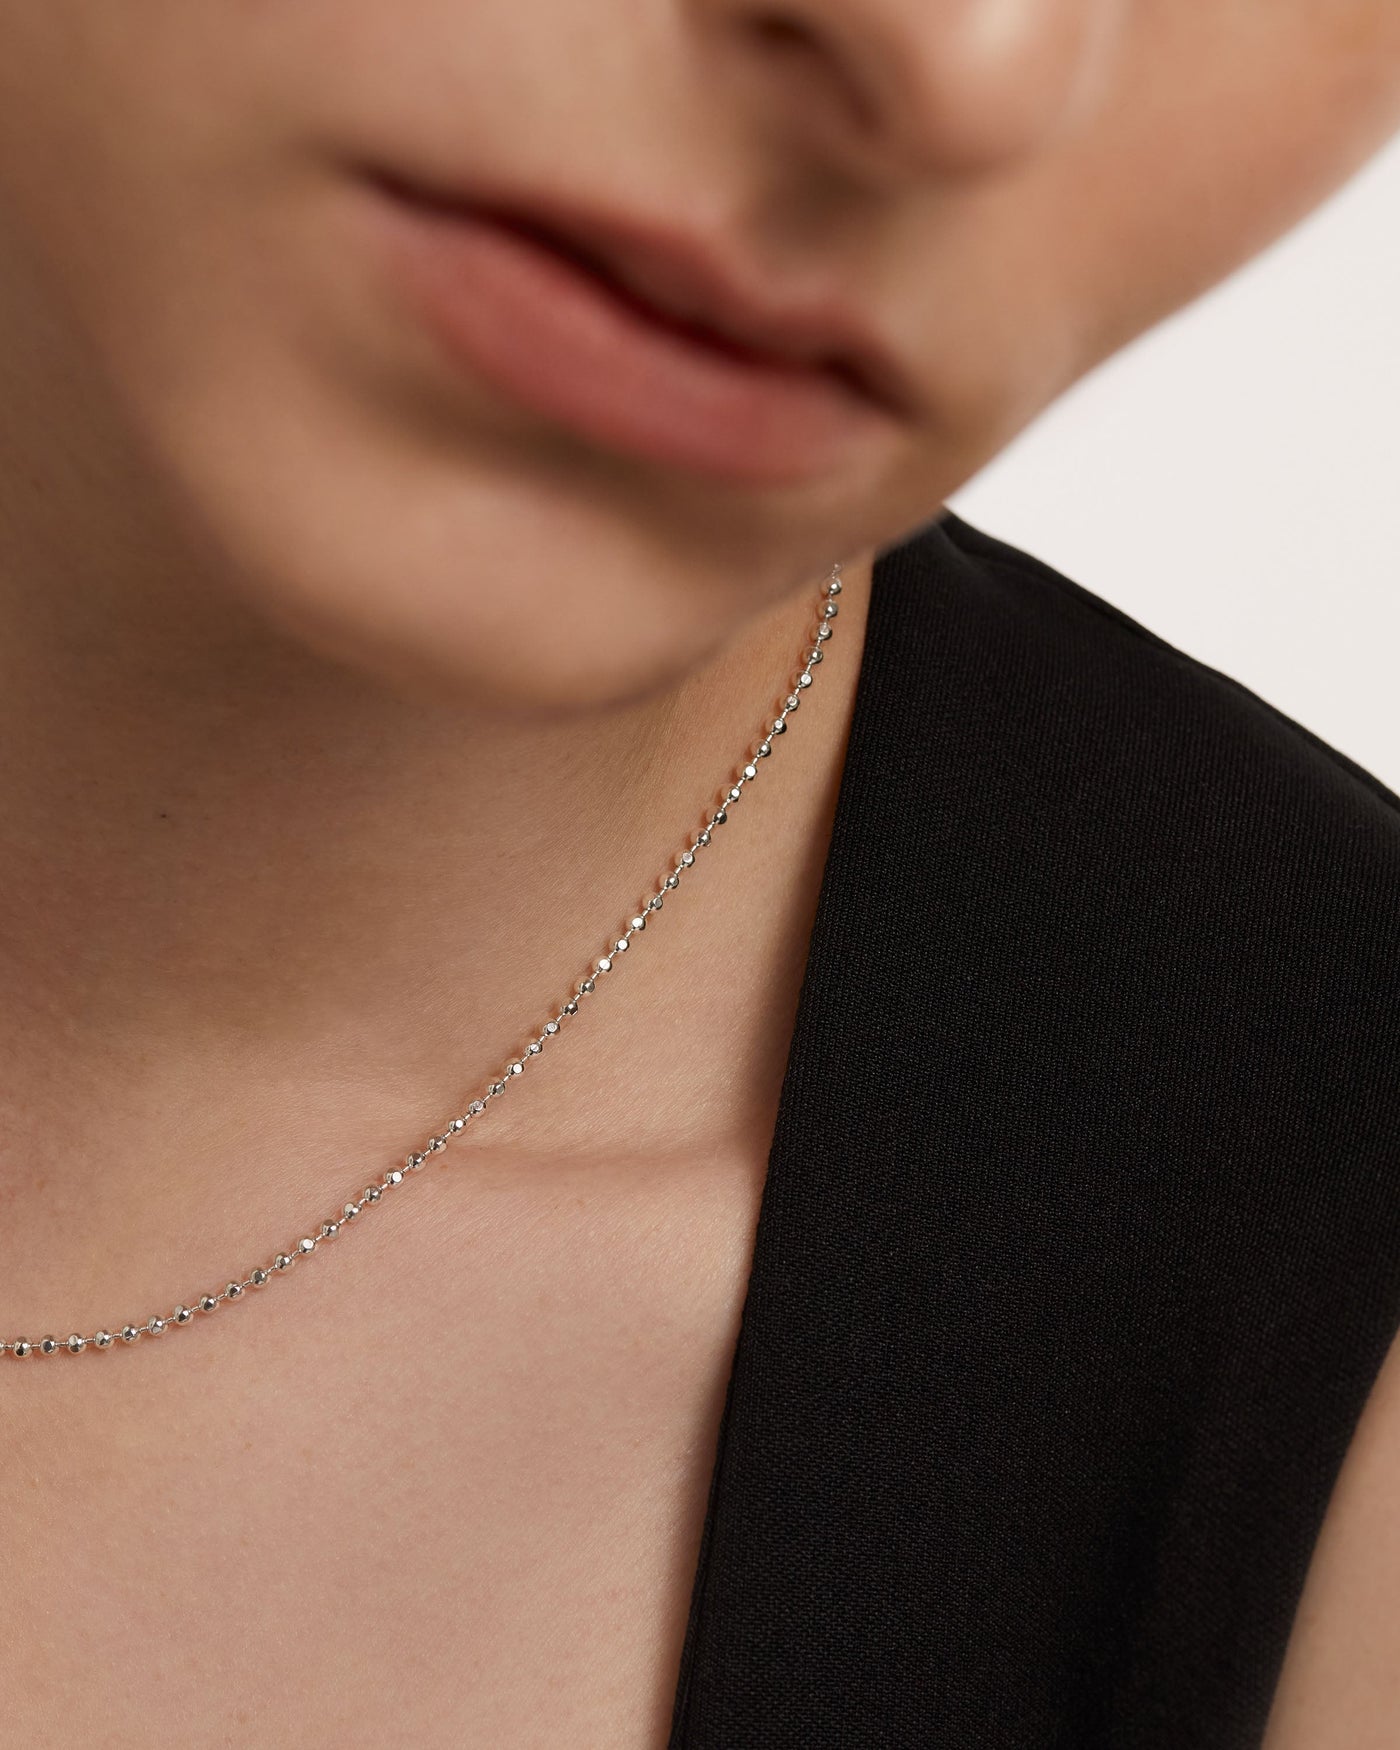 4mm Solid .925 Sterling Silver Military Ball Chain Necklace, 24 inches -  Walmart.com